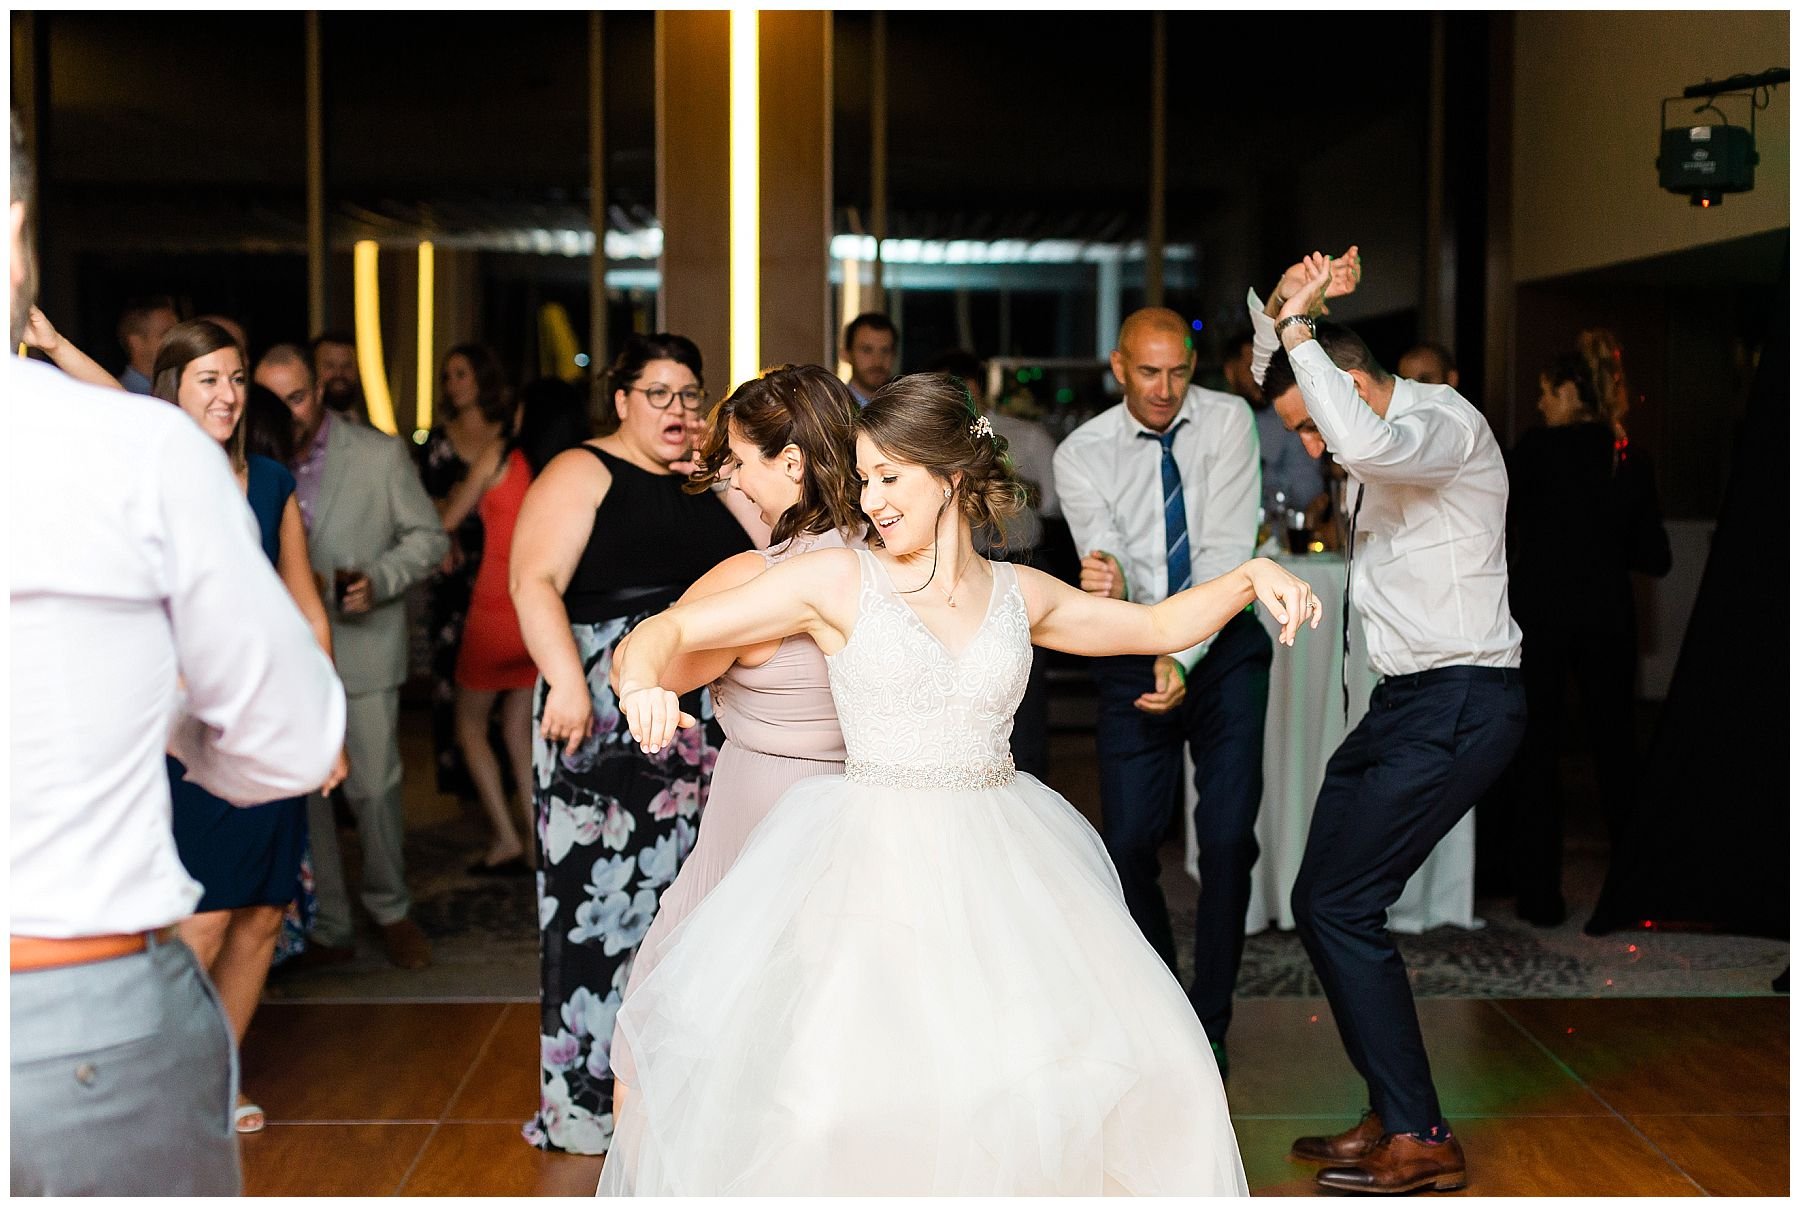 Guests dancing at hotel wedding in Ottawa